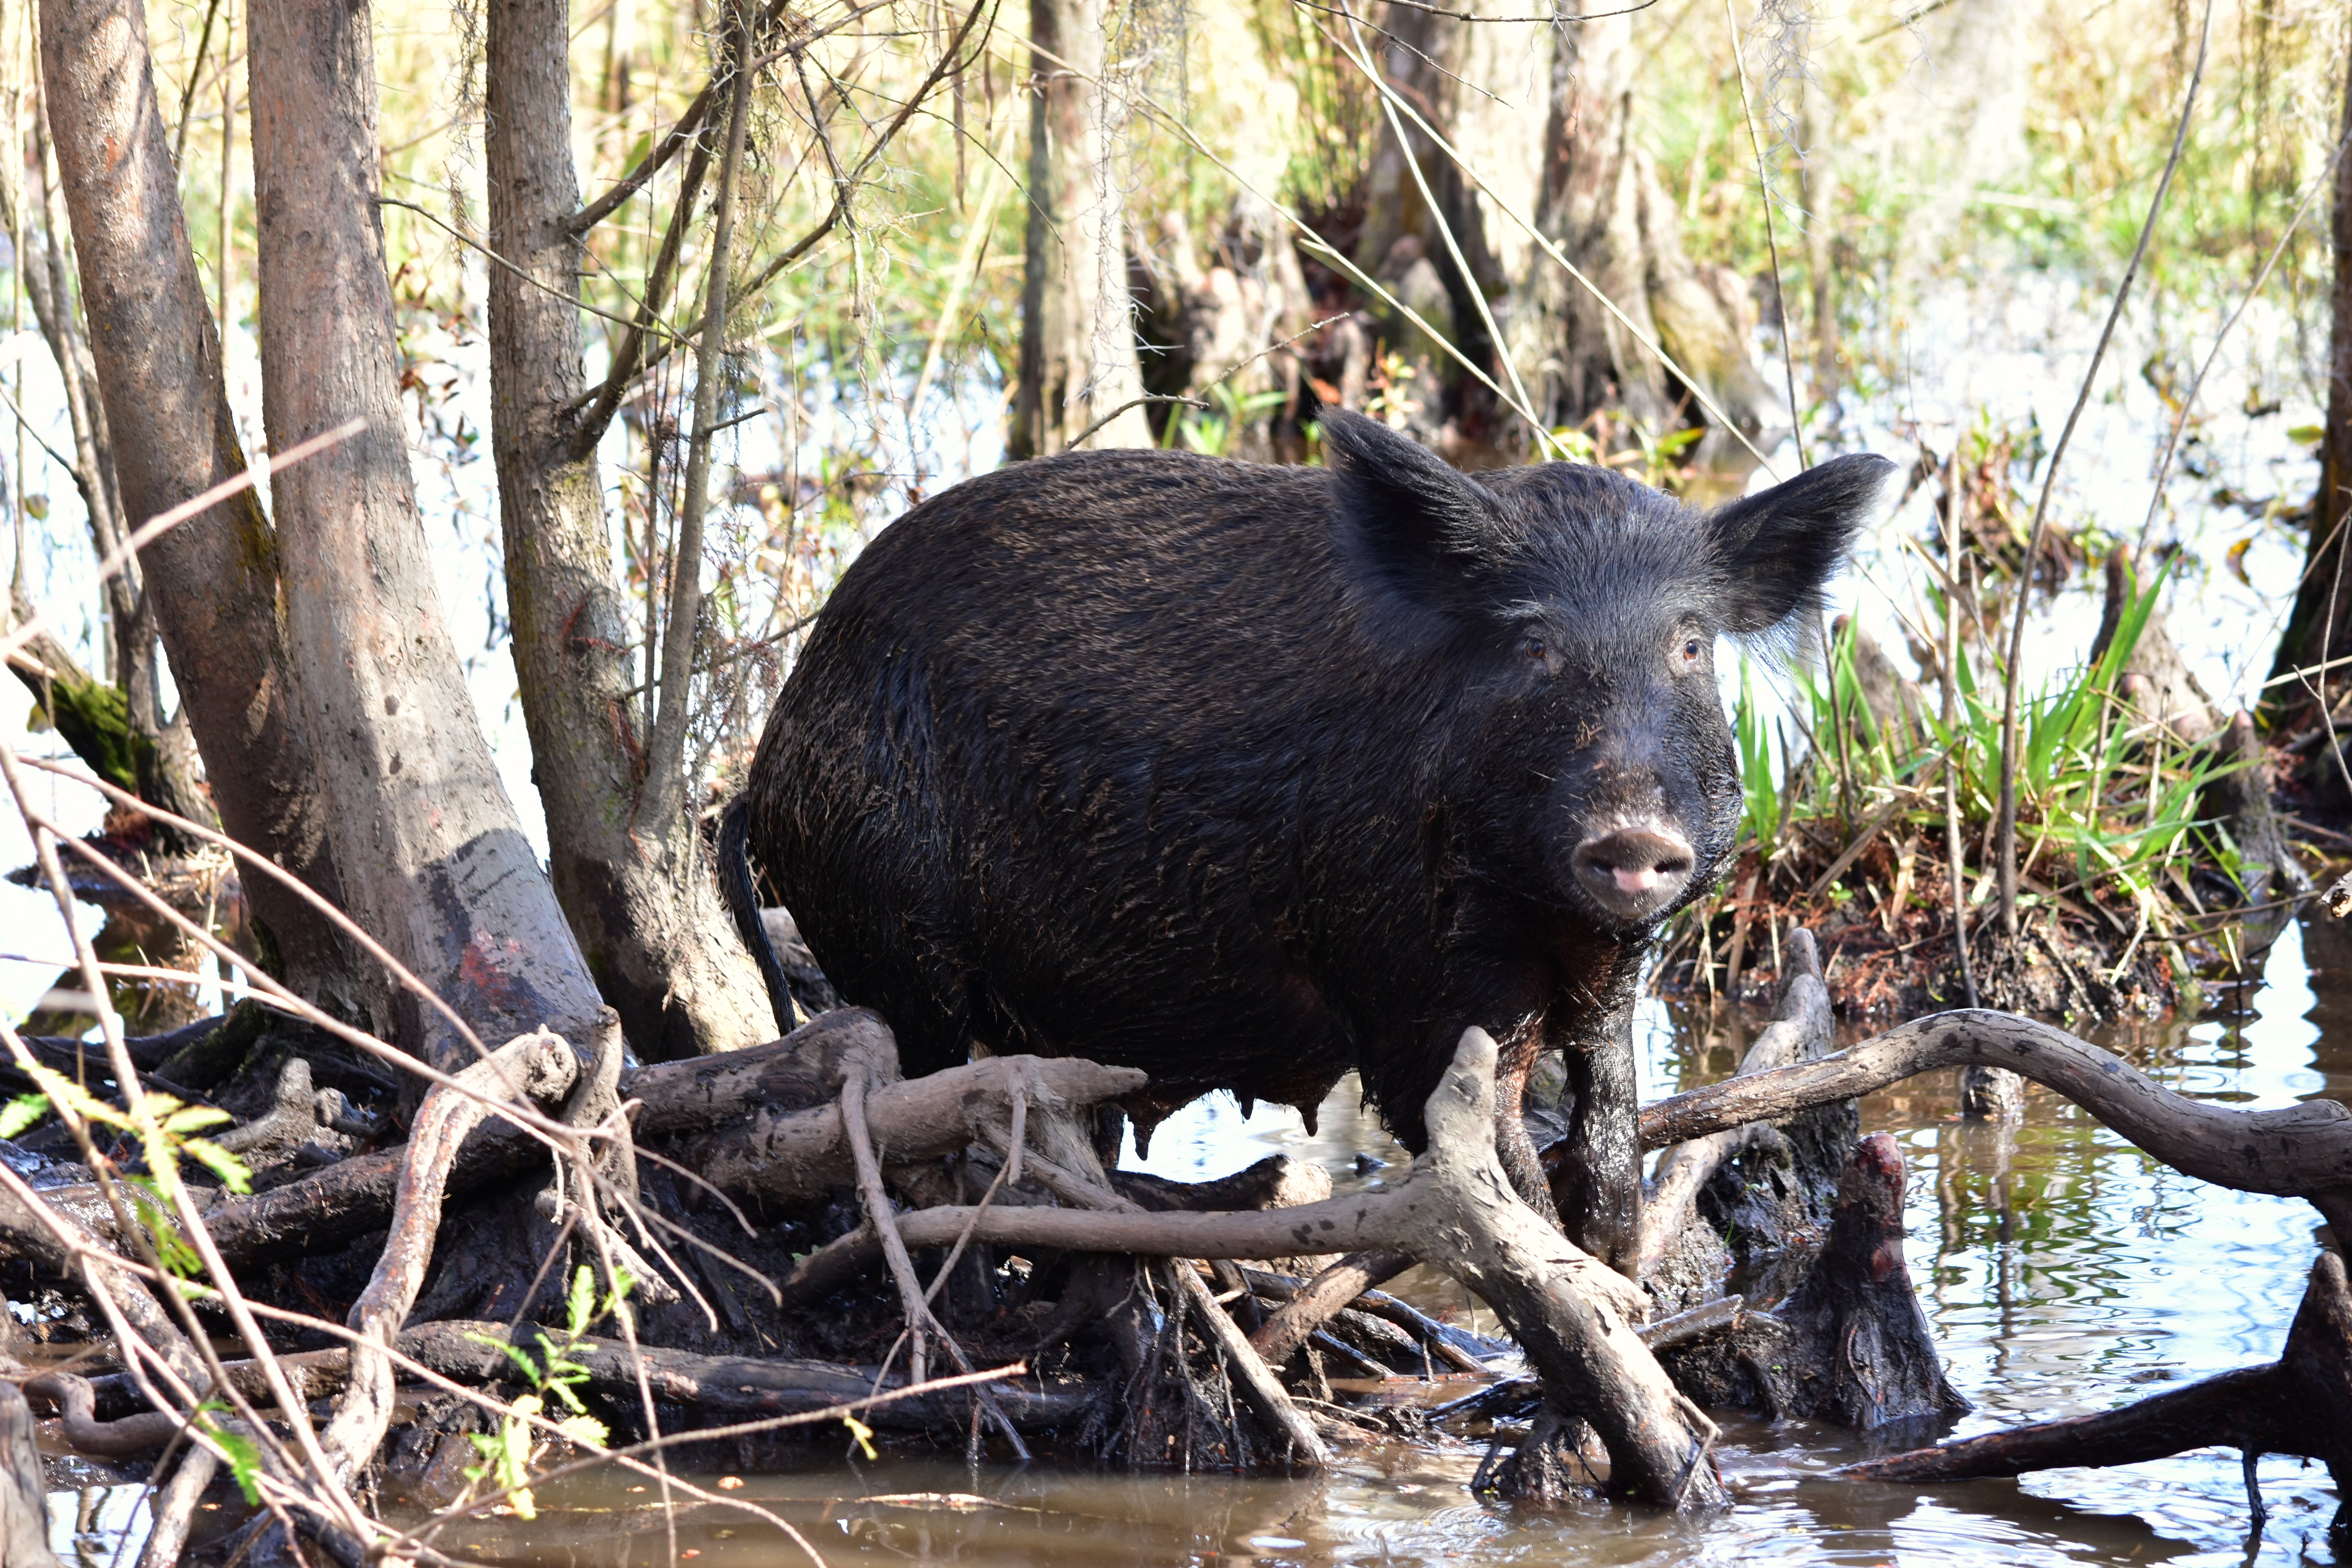 Animals of the Swamp - Feral Hog by Pedrik is licensed under CC-by-2.0